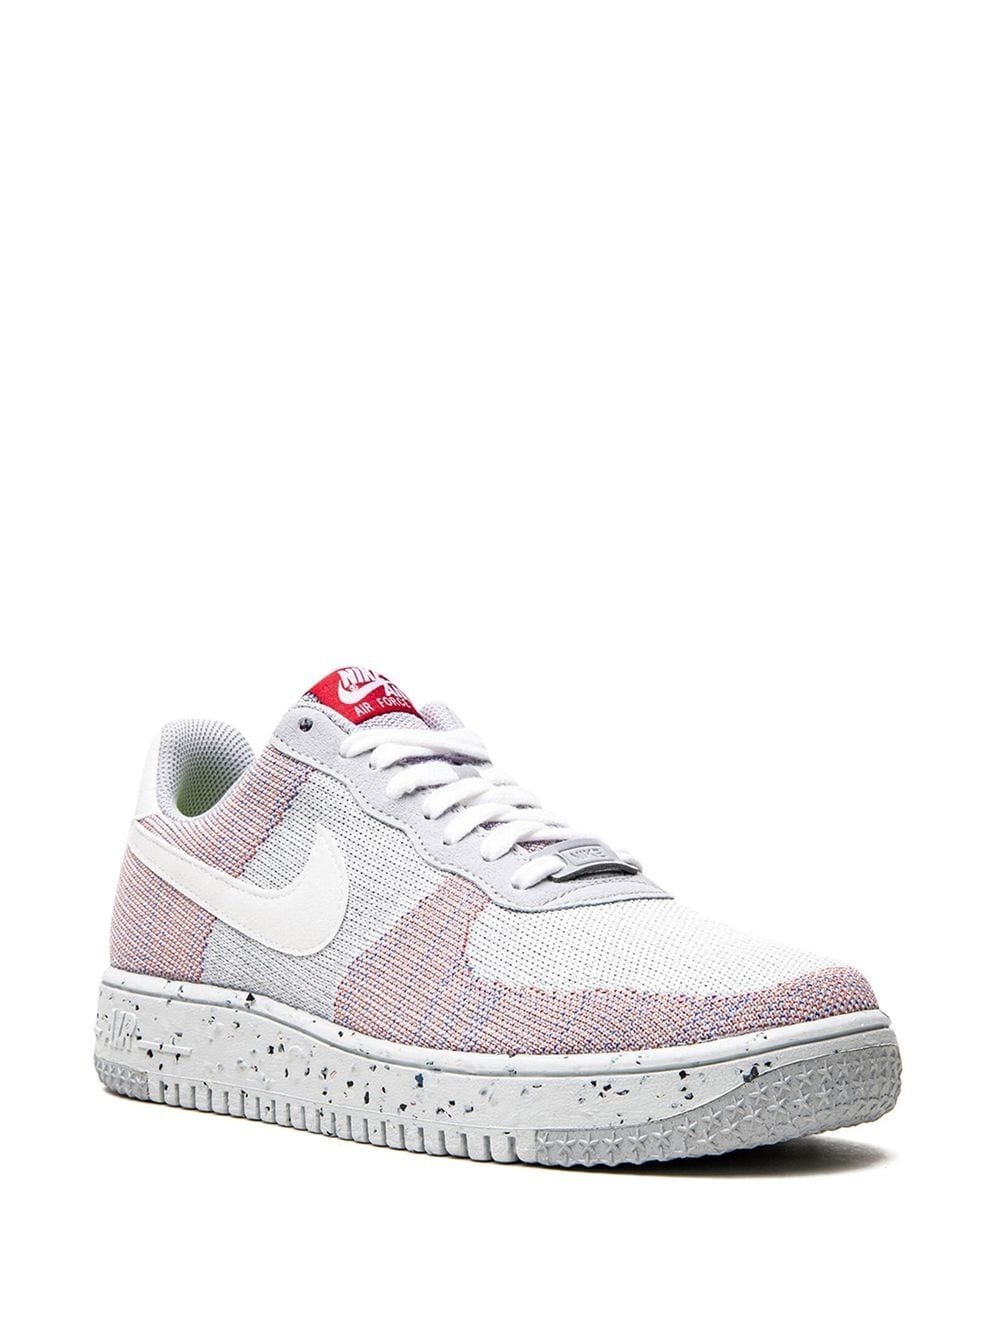 Air Force 1 Low Crater Flyknit "Wolf Grey" sneakers - 2